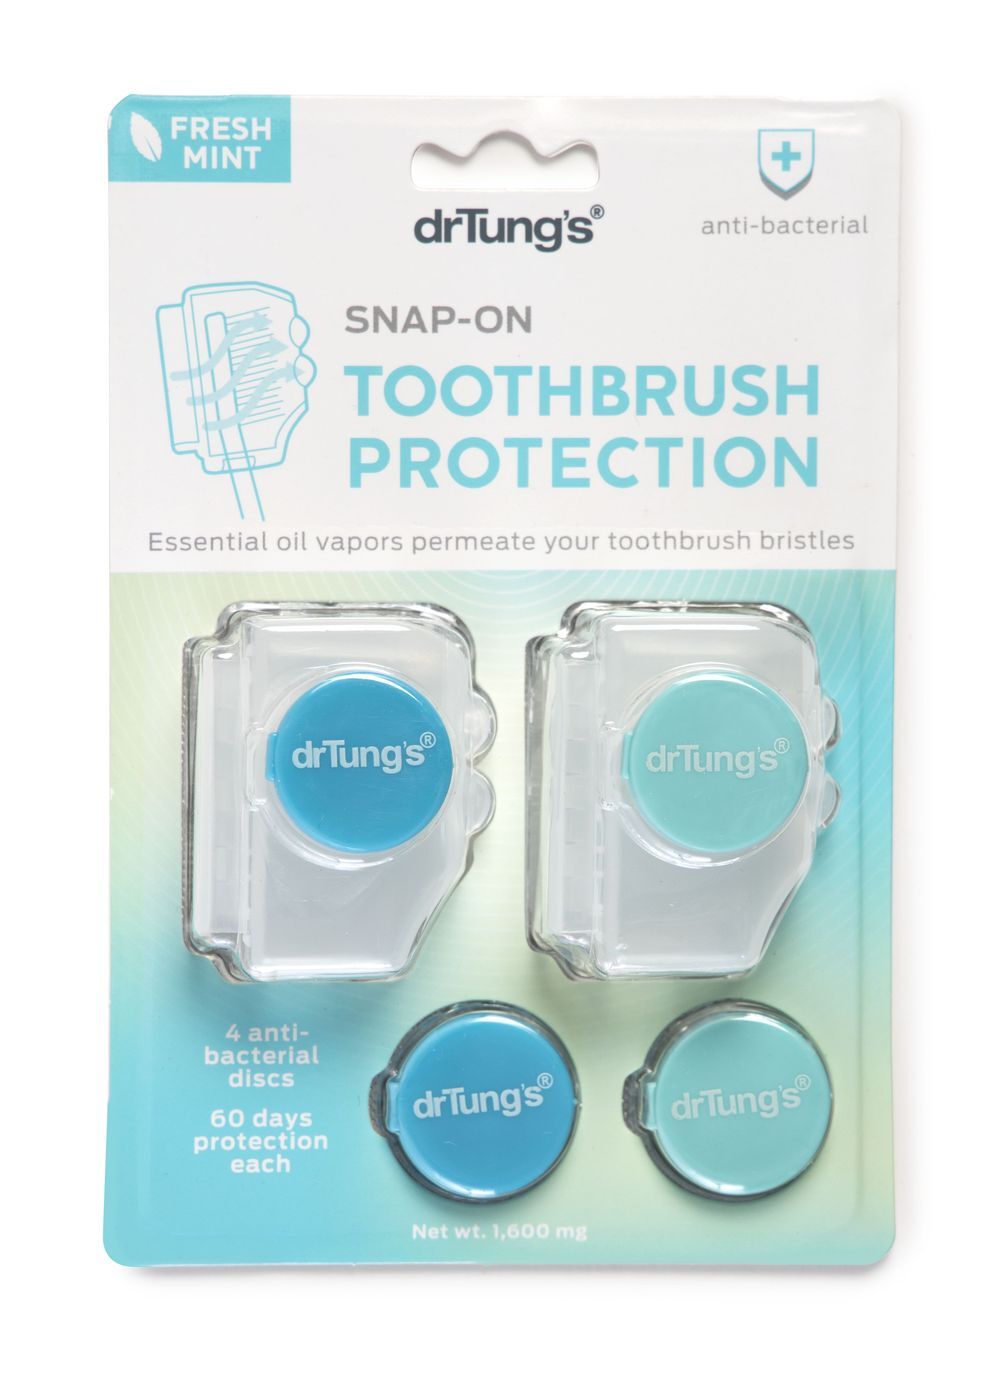 Dr Tung's Snap-on Toothbrush Protectors